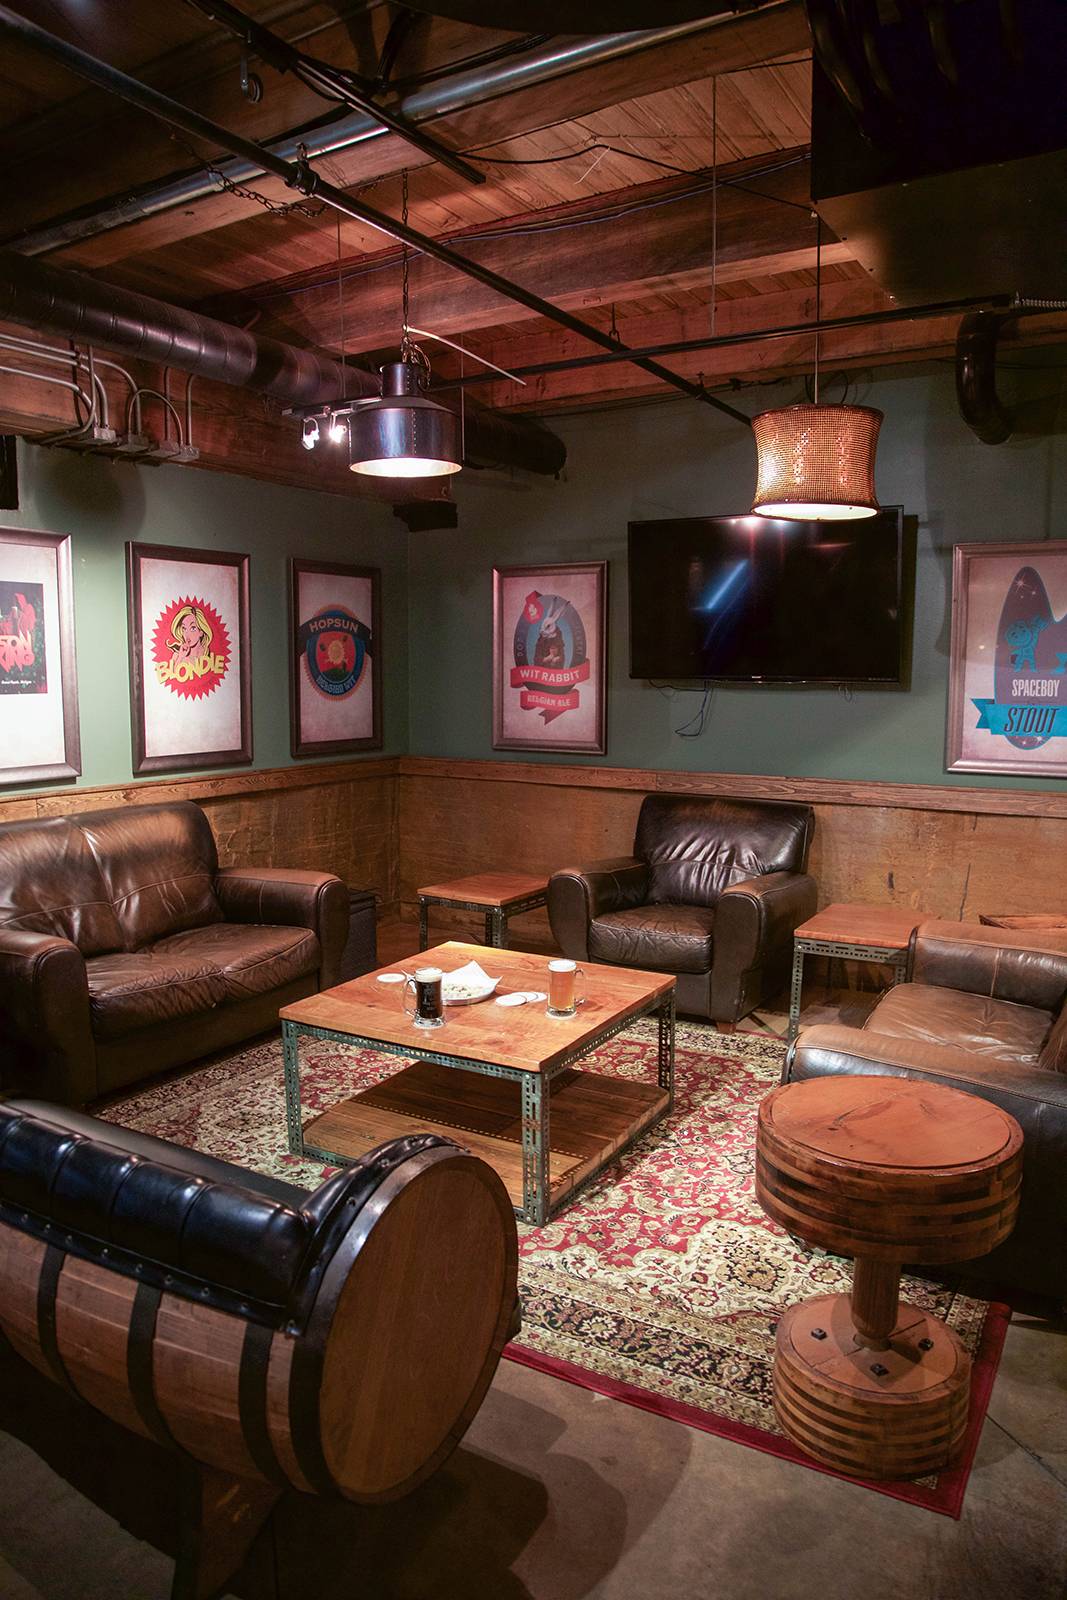 The Lounge at B.O.B.'s Brewery in downtown Grand Rapids